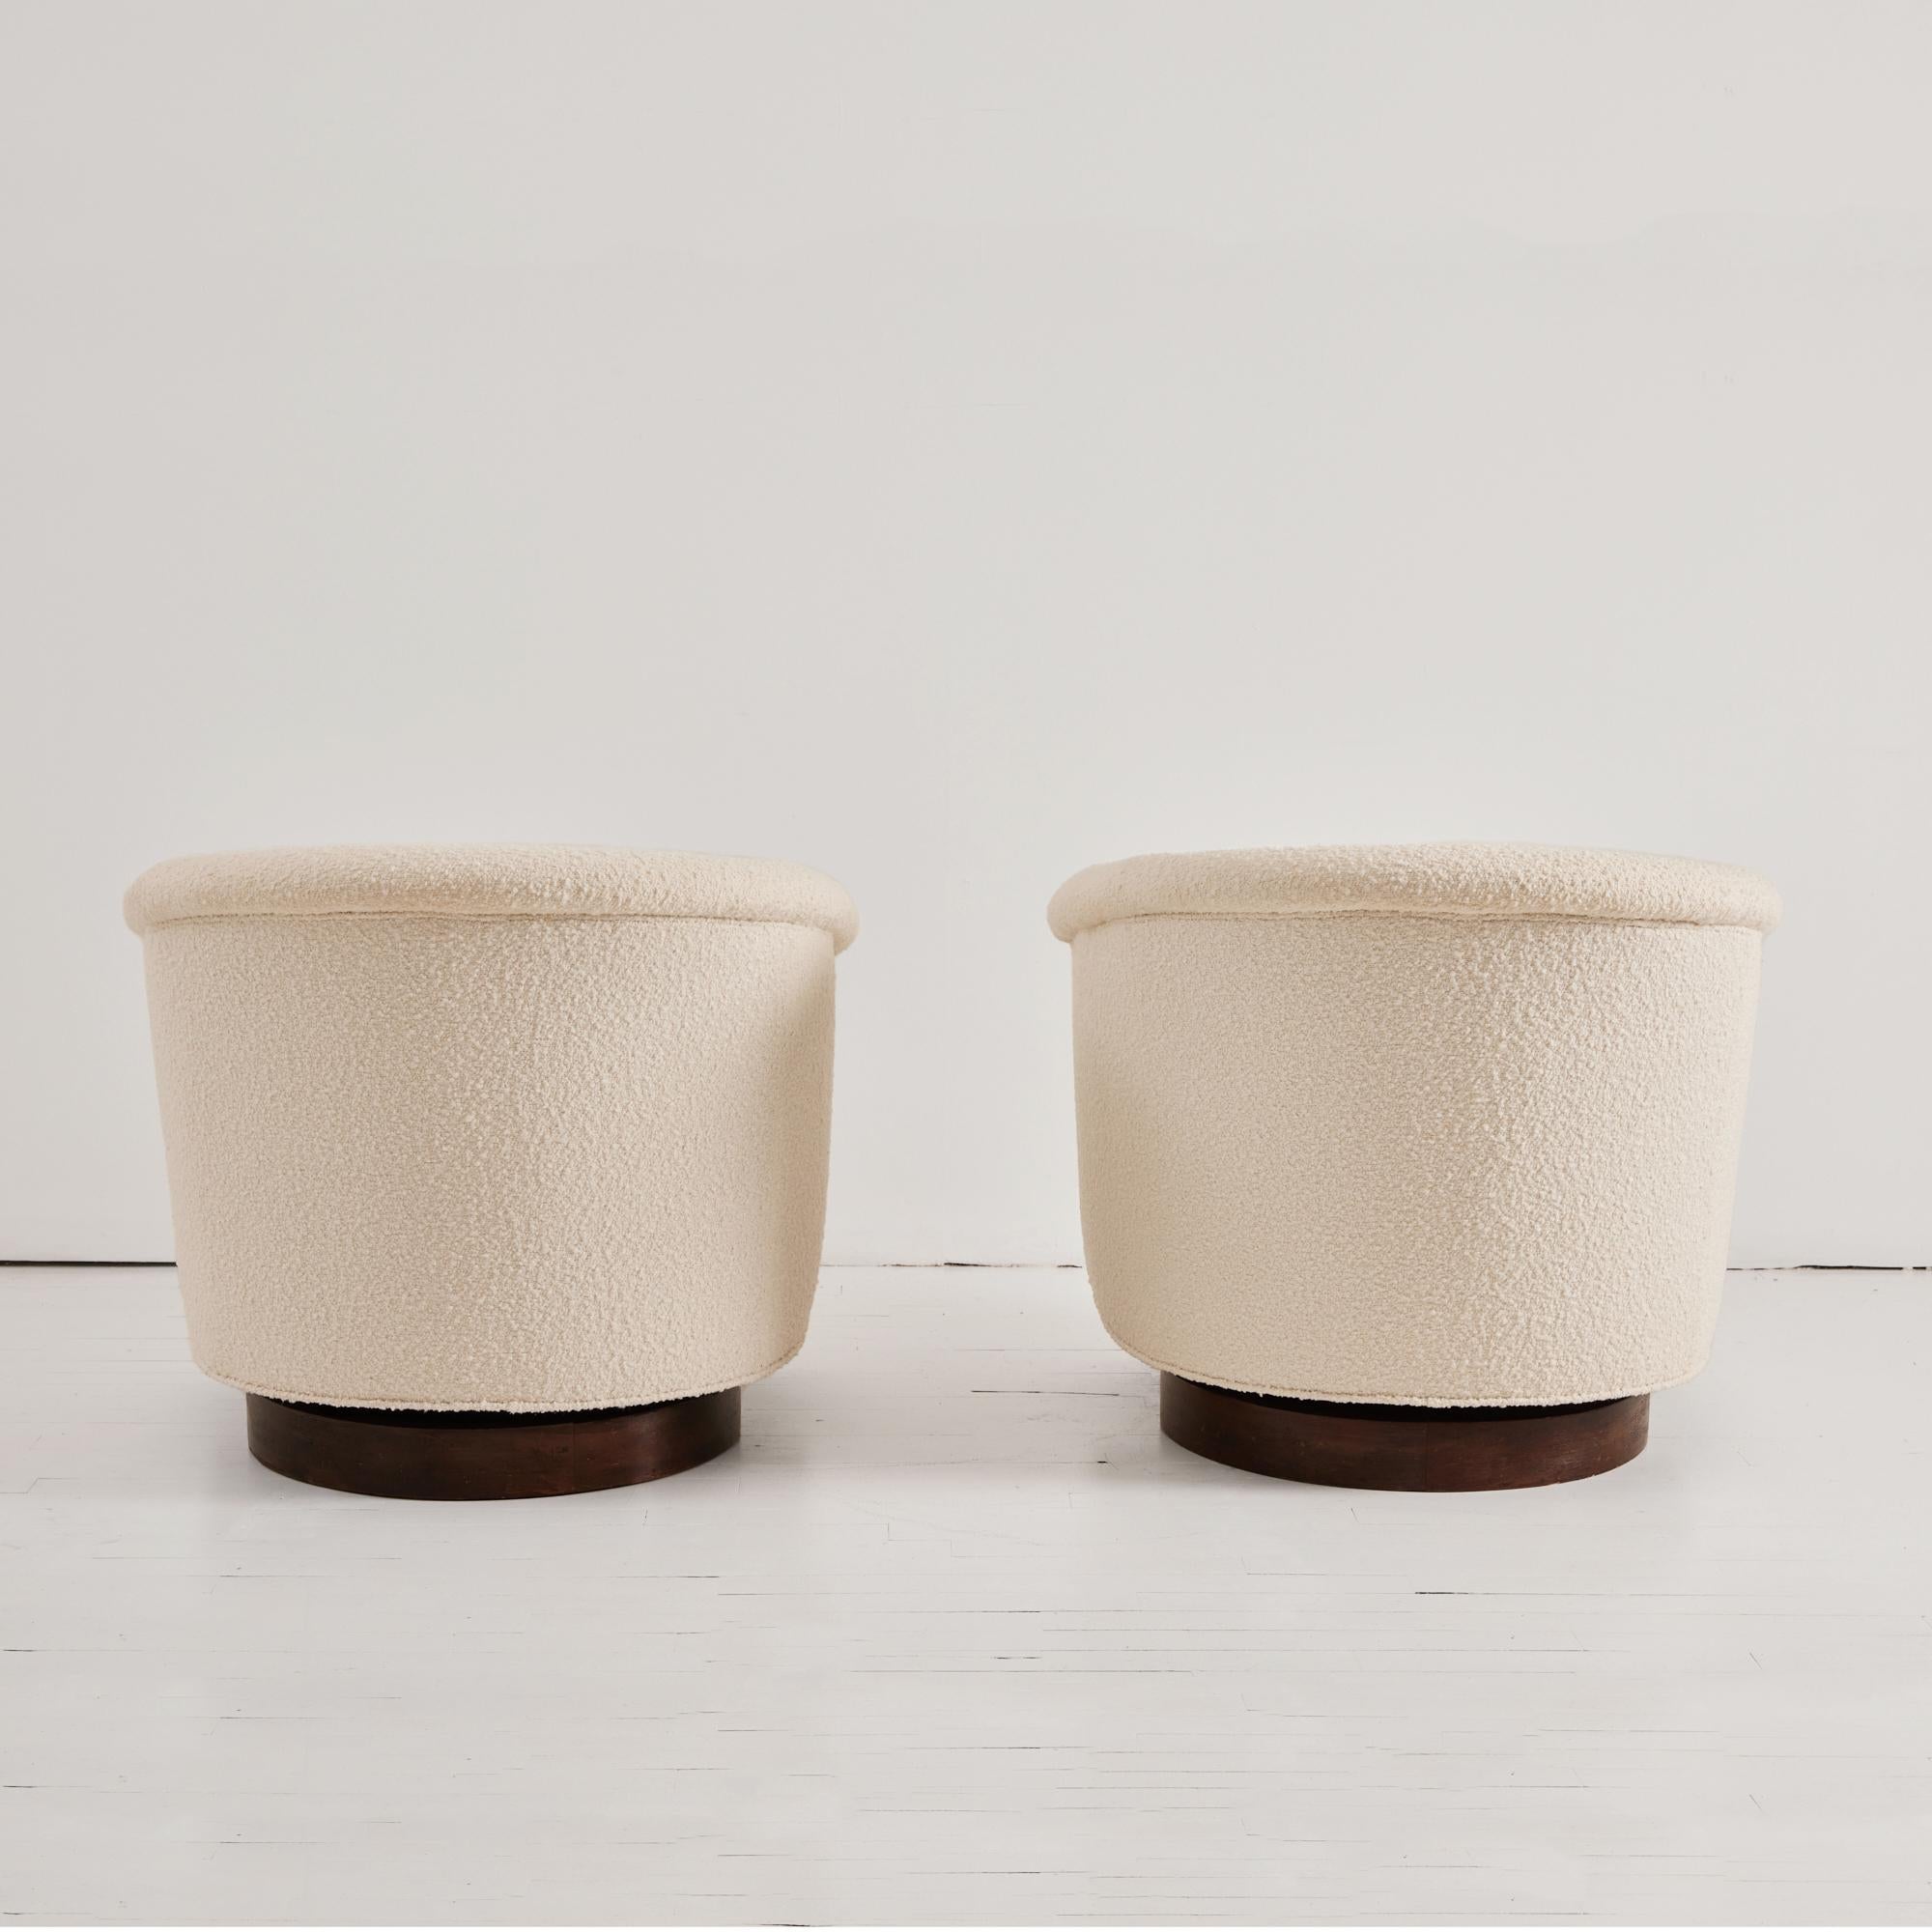 North American 1950s Milo Baughman Attributed Swivel Tub Chairs in Ivory Boucle - Set of 2